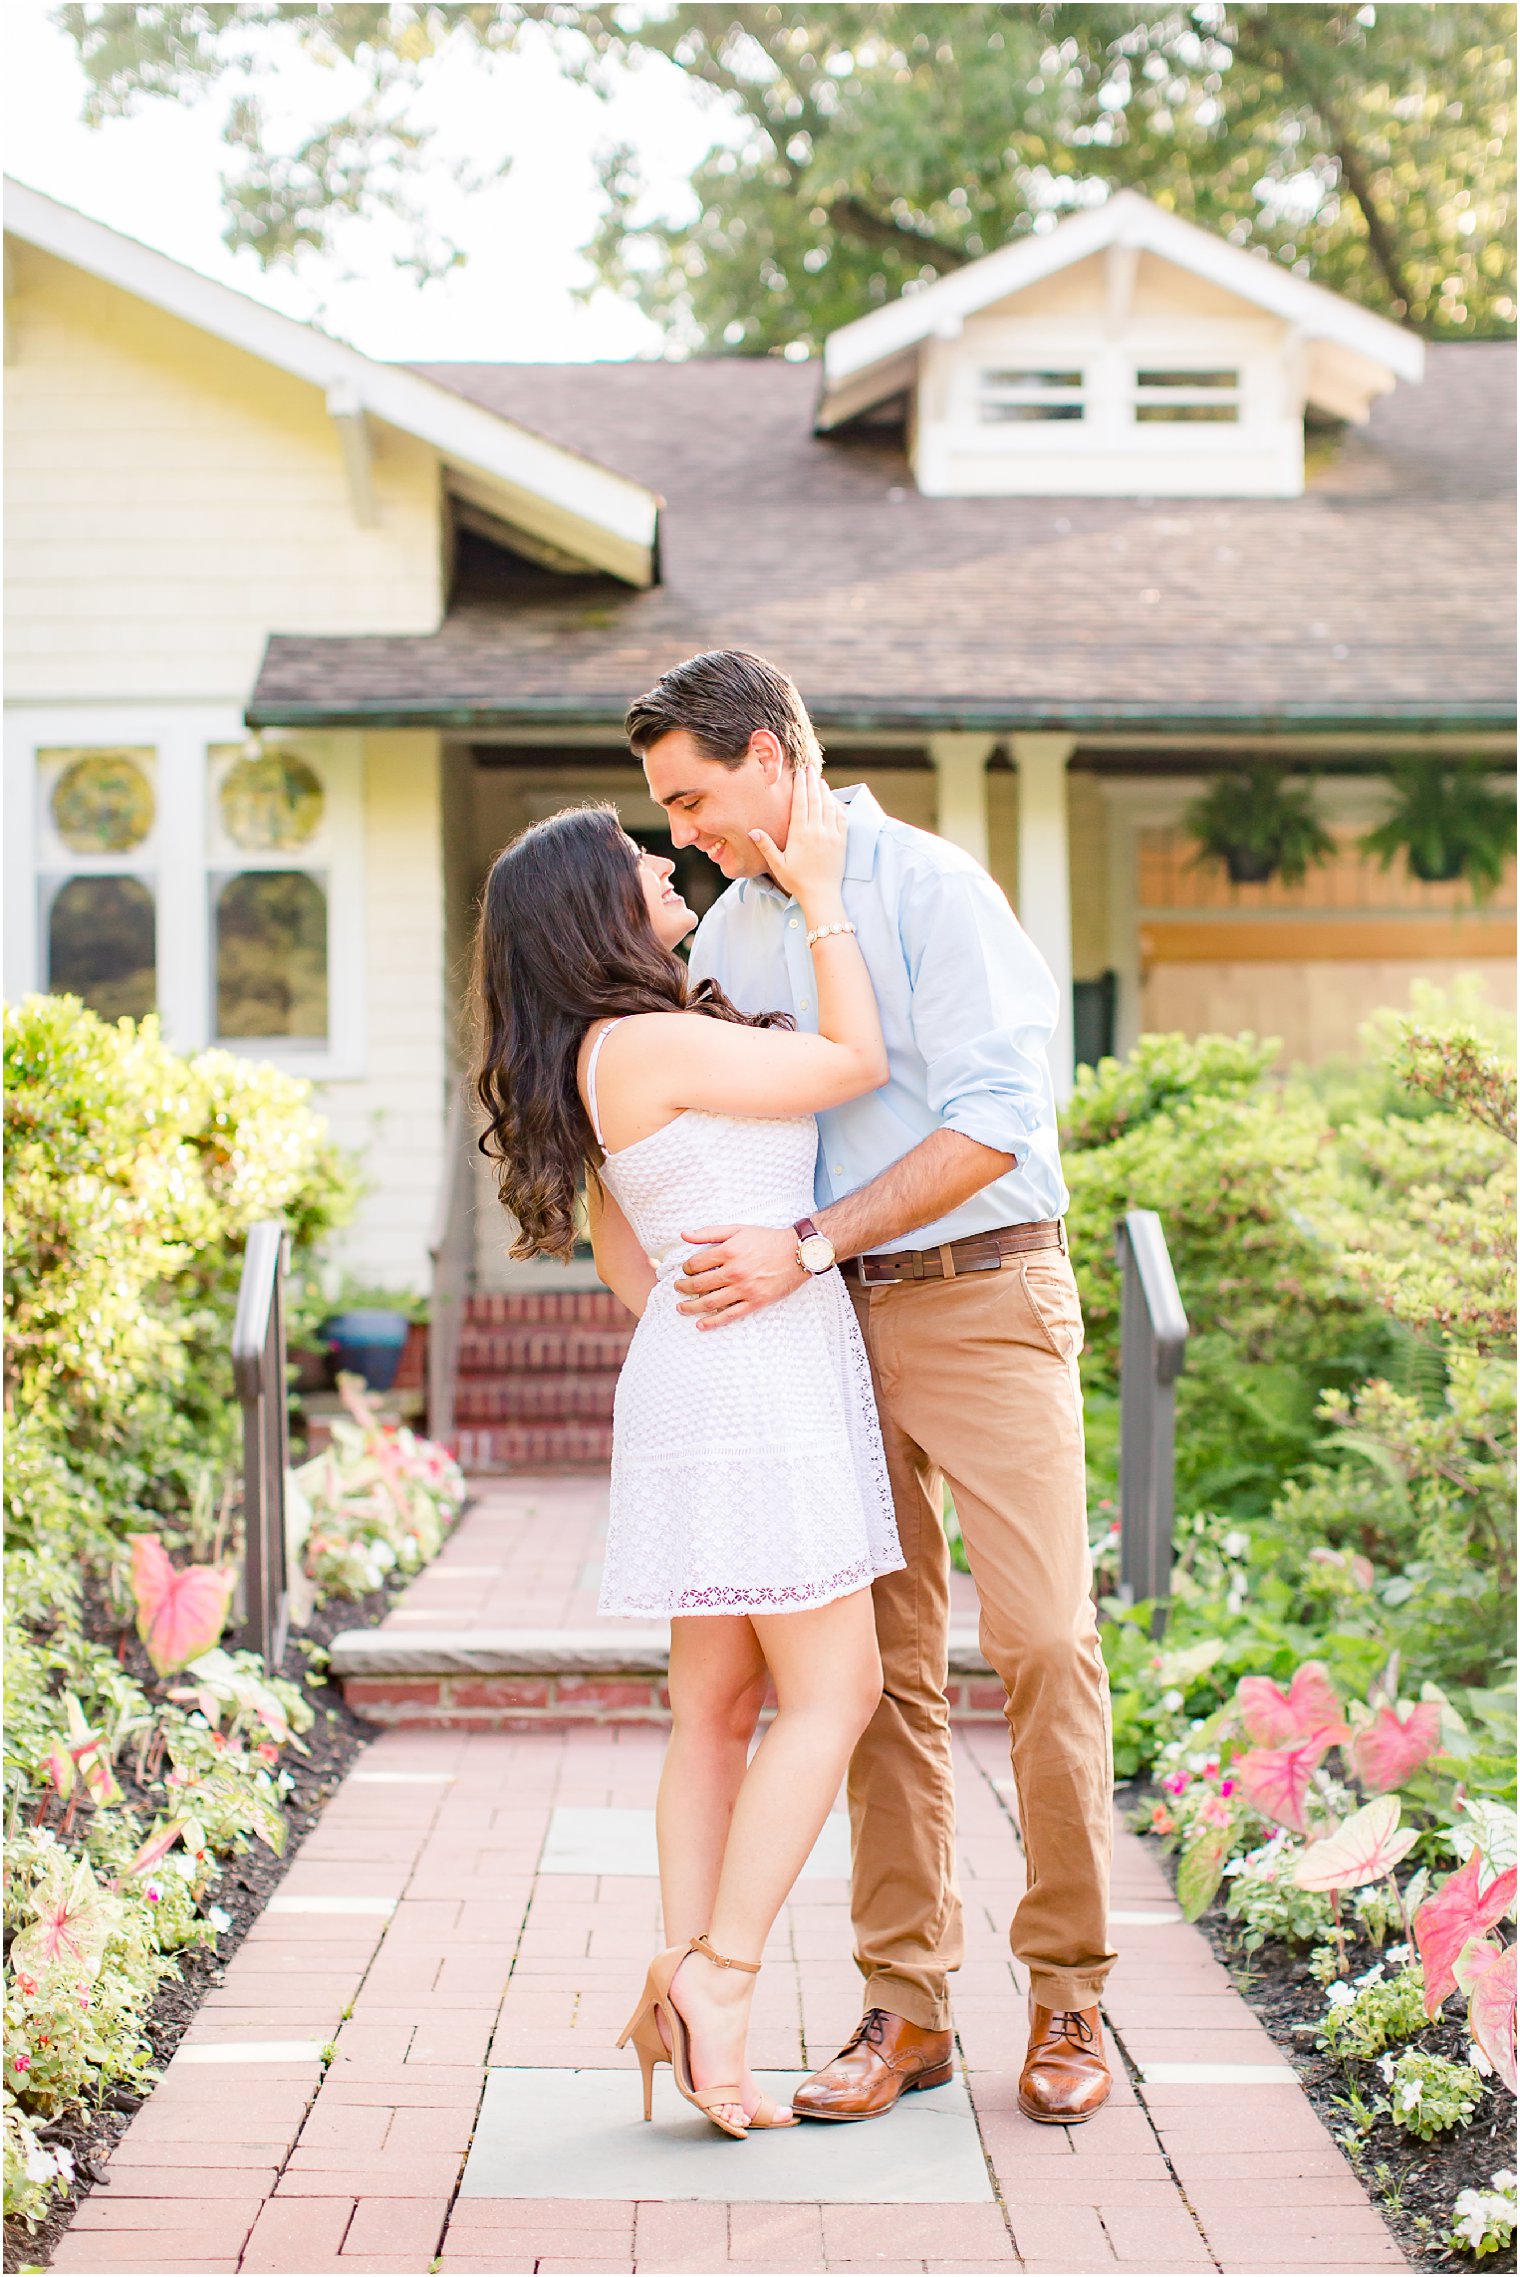 Engagement photo at Sayen House and Gardens